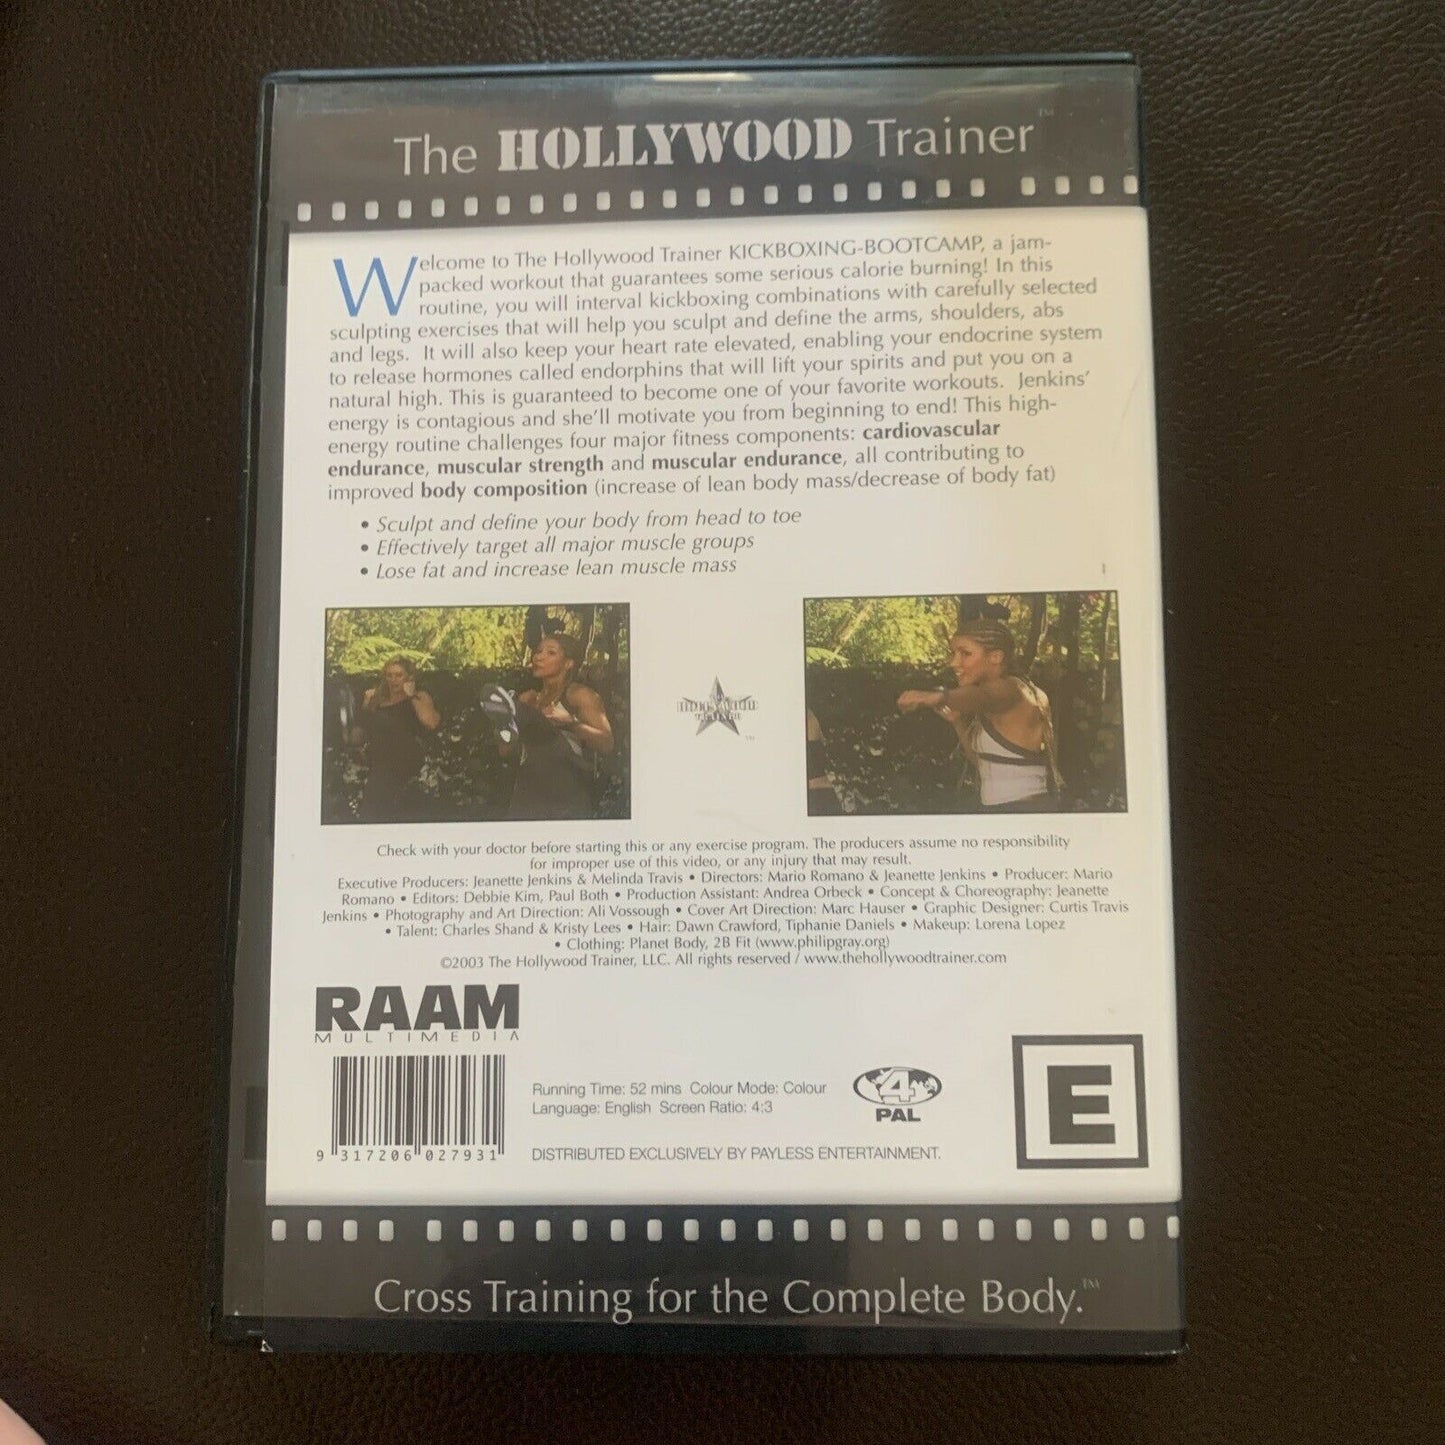 The Hollywood Trainer: Kickboxing-Bootcamp (DVD, 2003) Jeanette Jenkins.